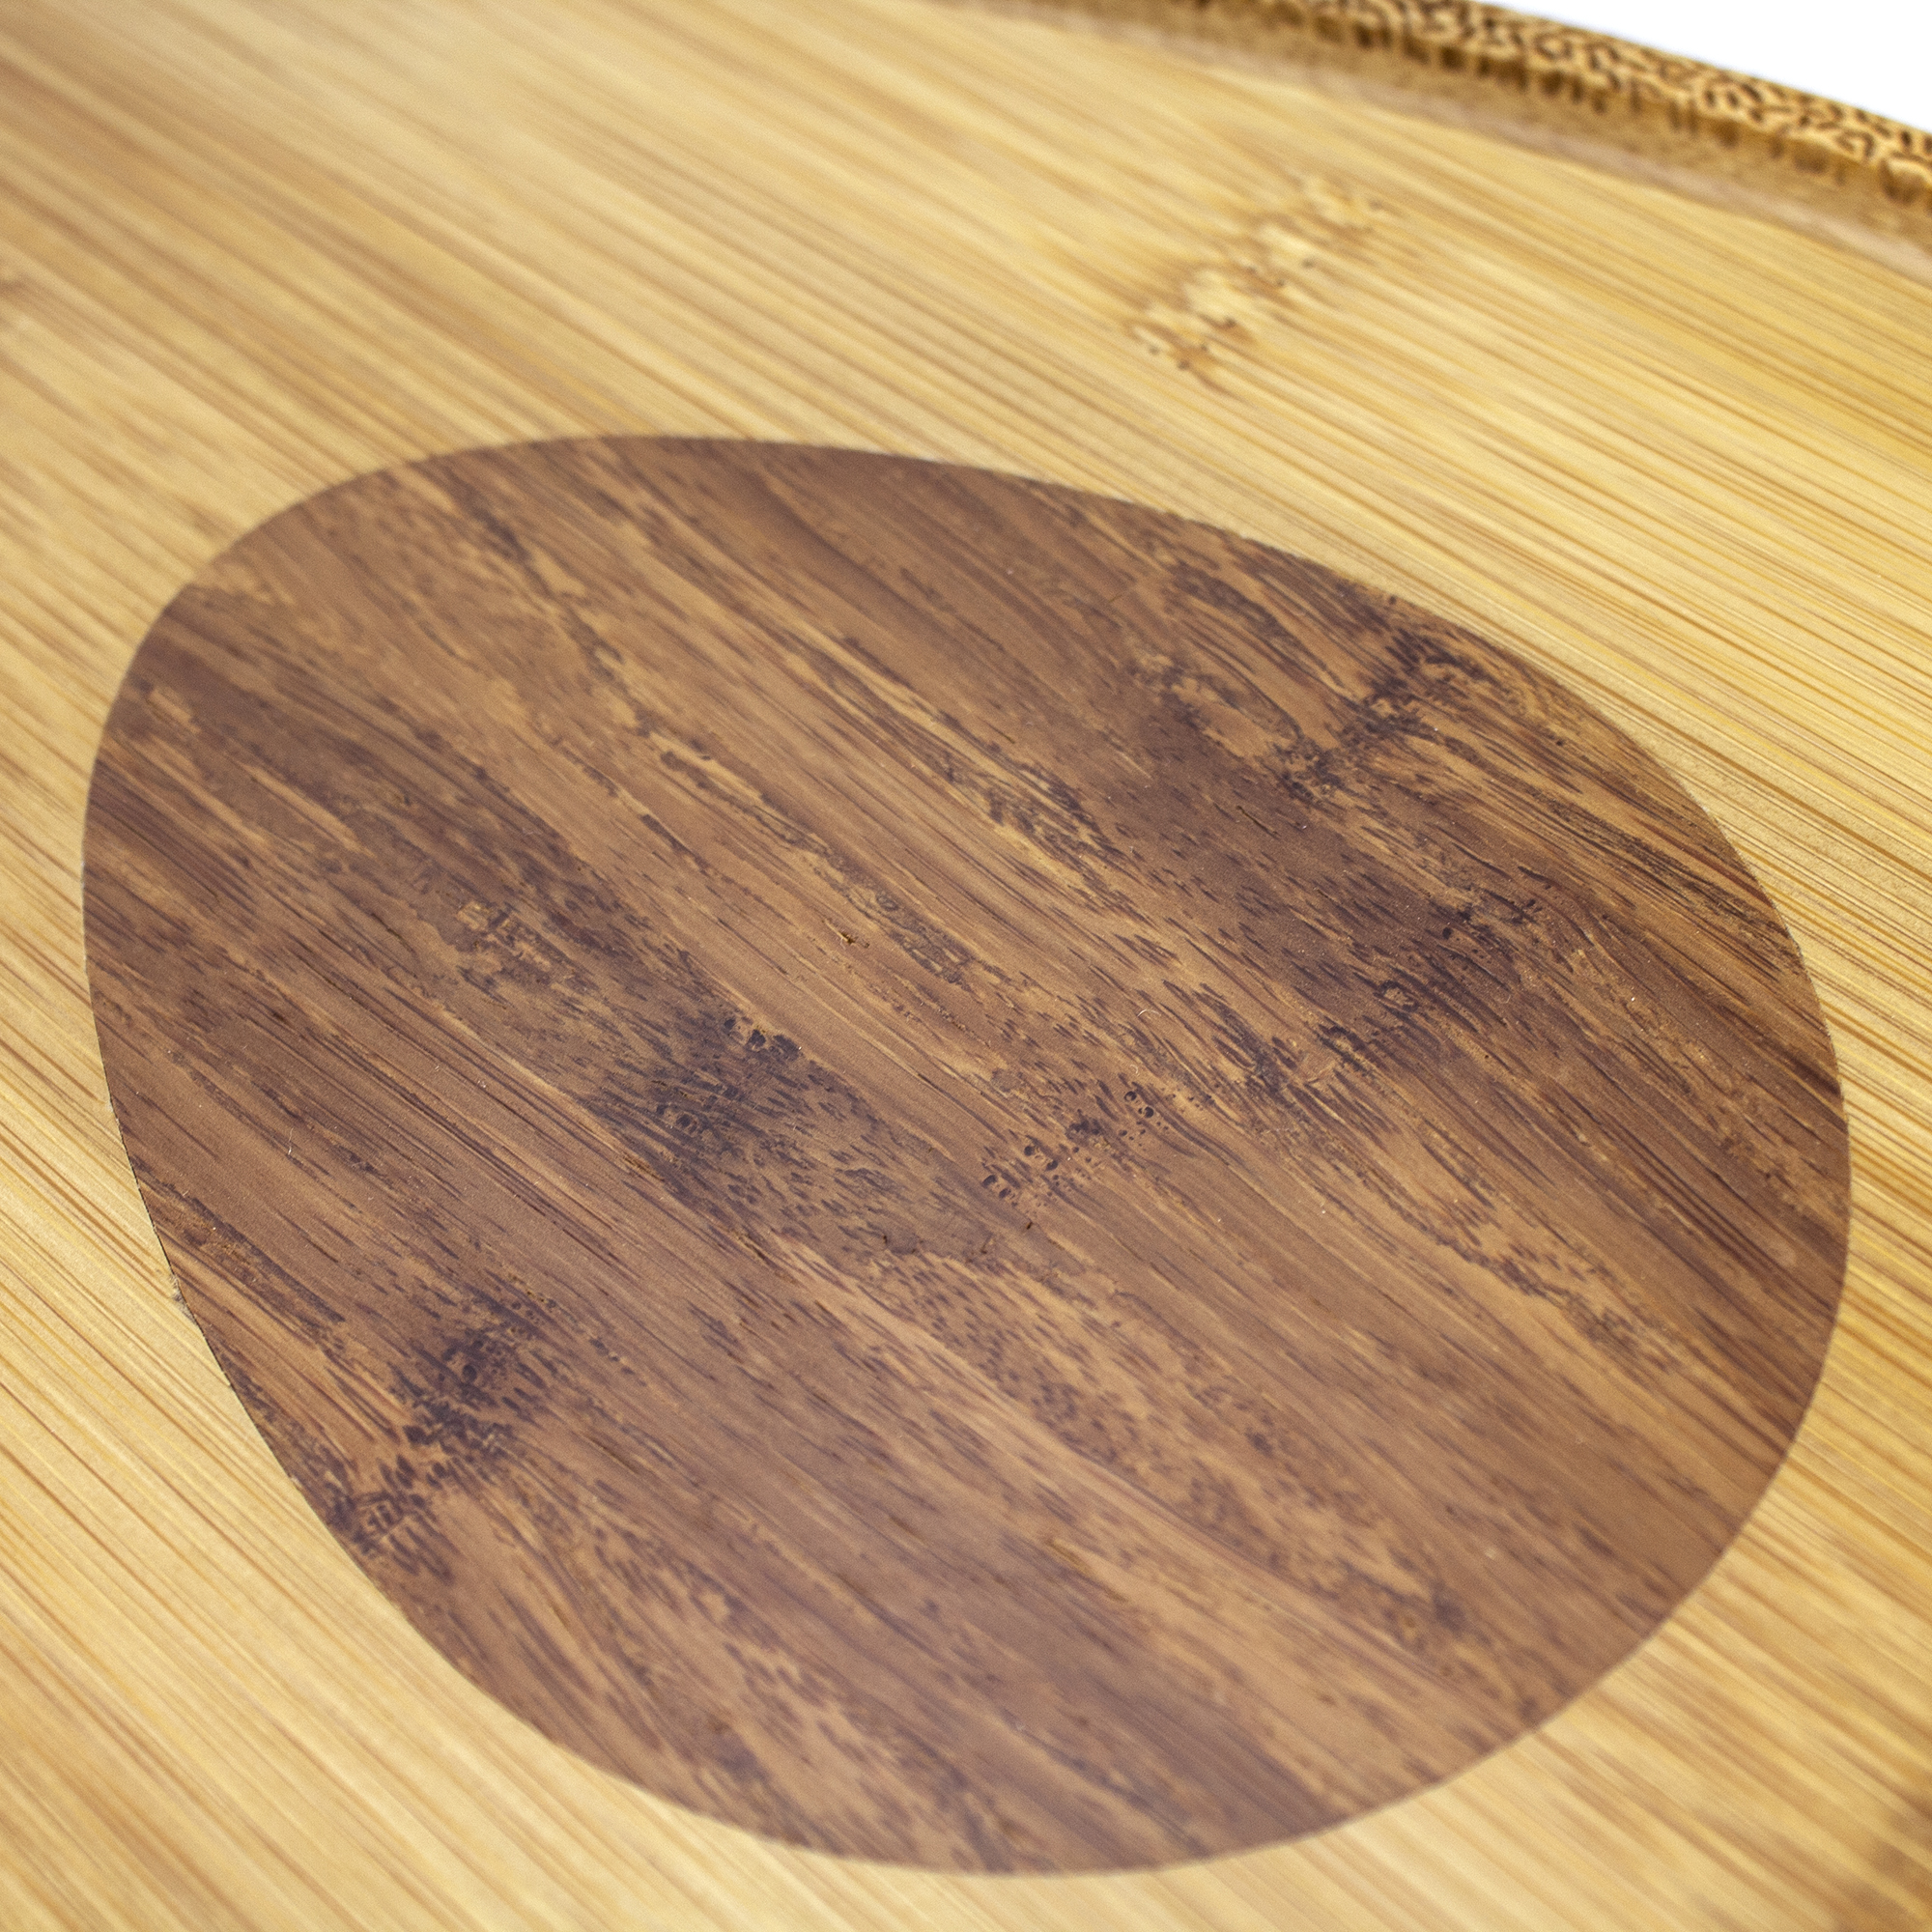 Totally Bamboo Avocado Obsession Eco-Friendly Serving and Cutting Board, Medium - image 3 of 5